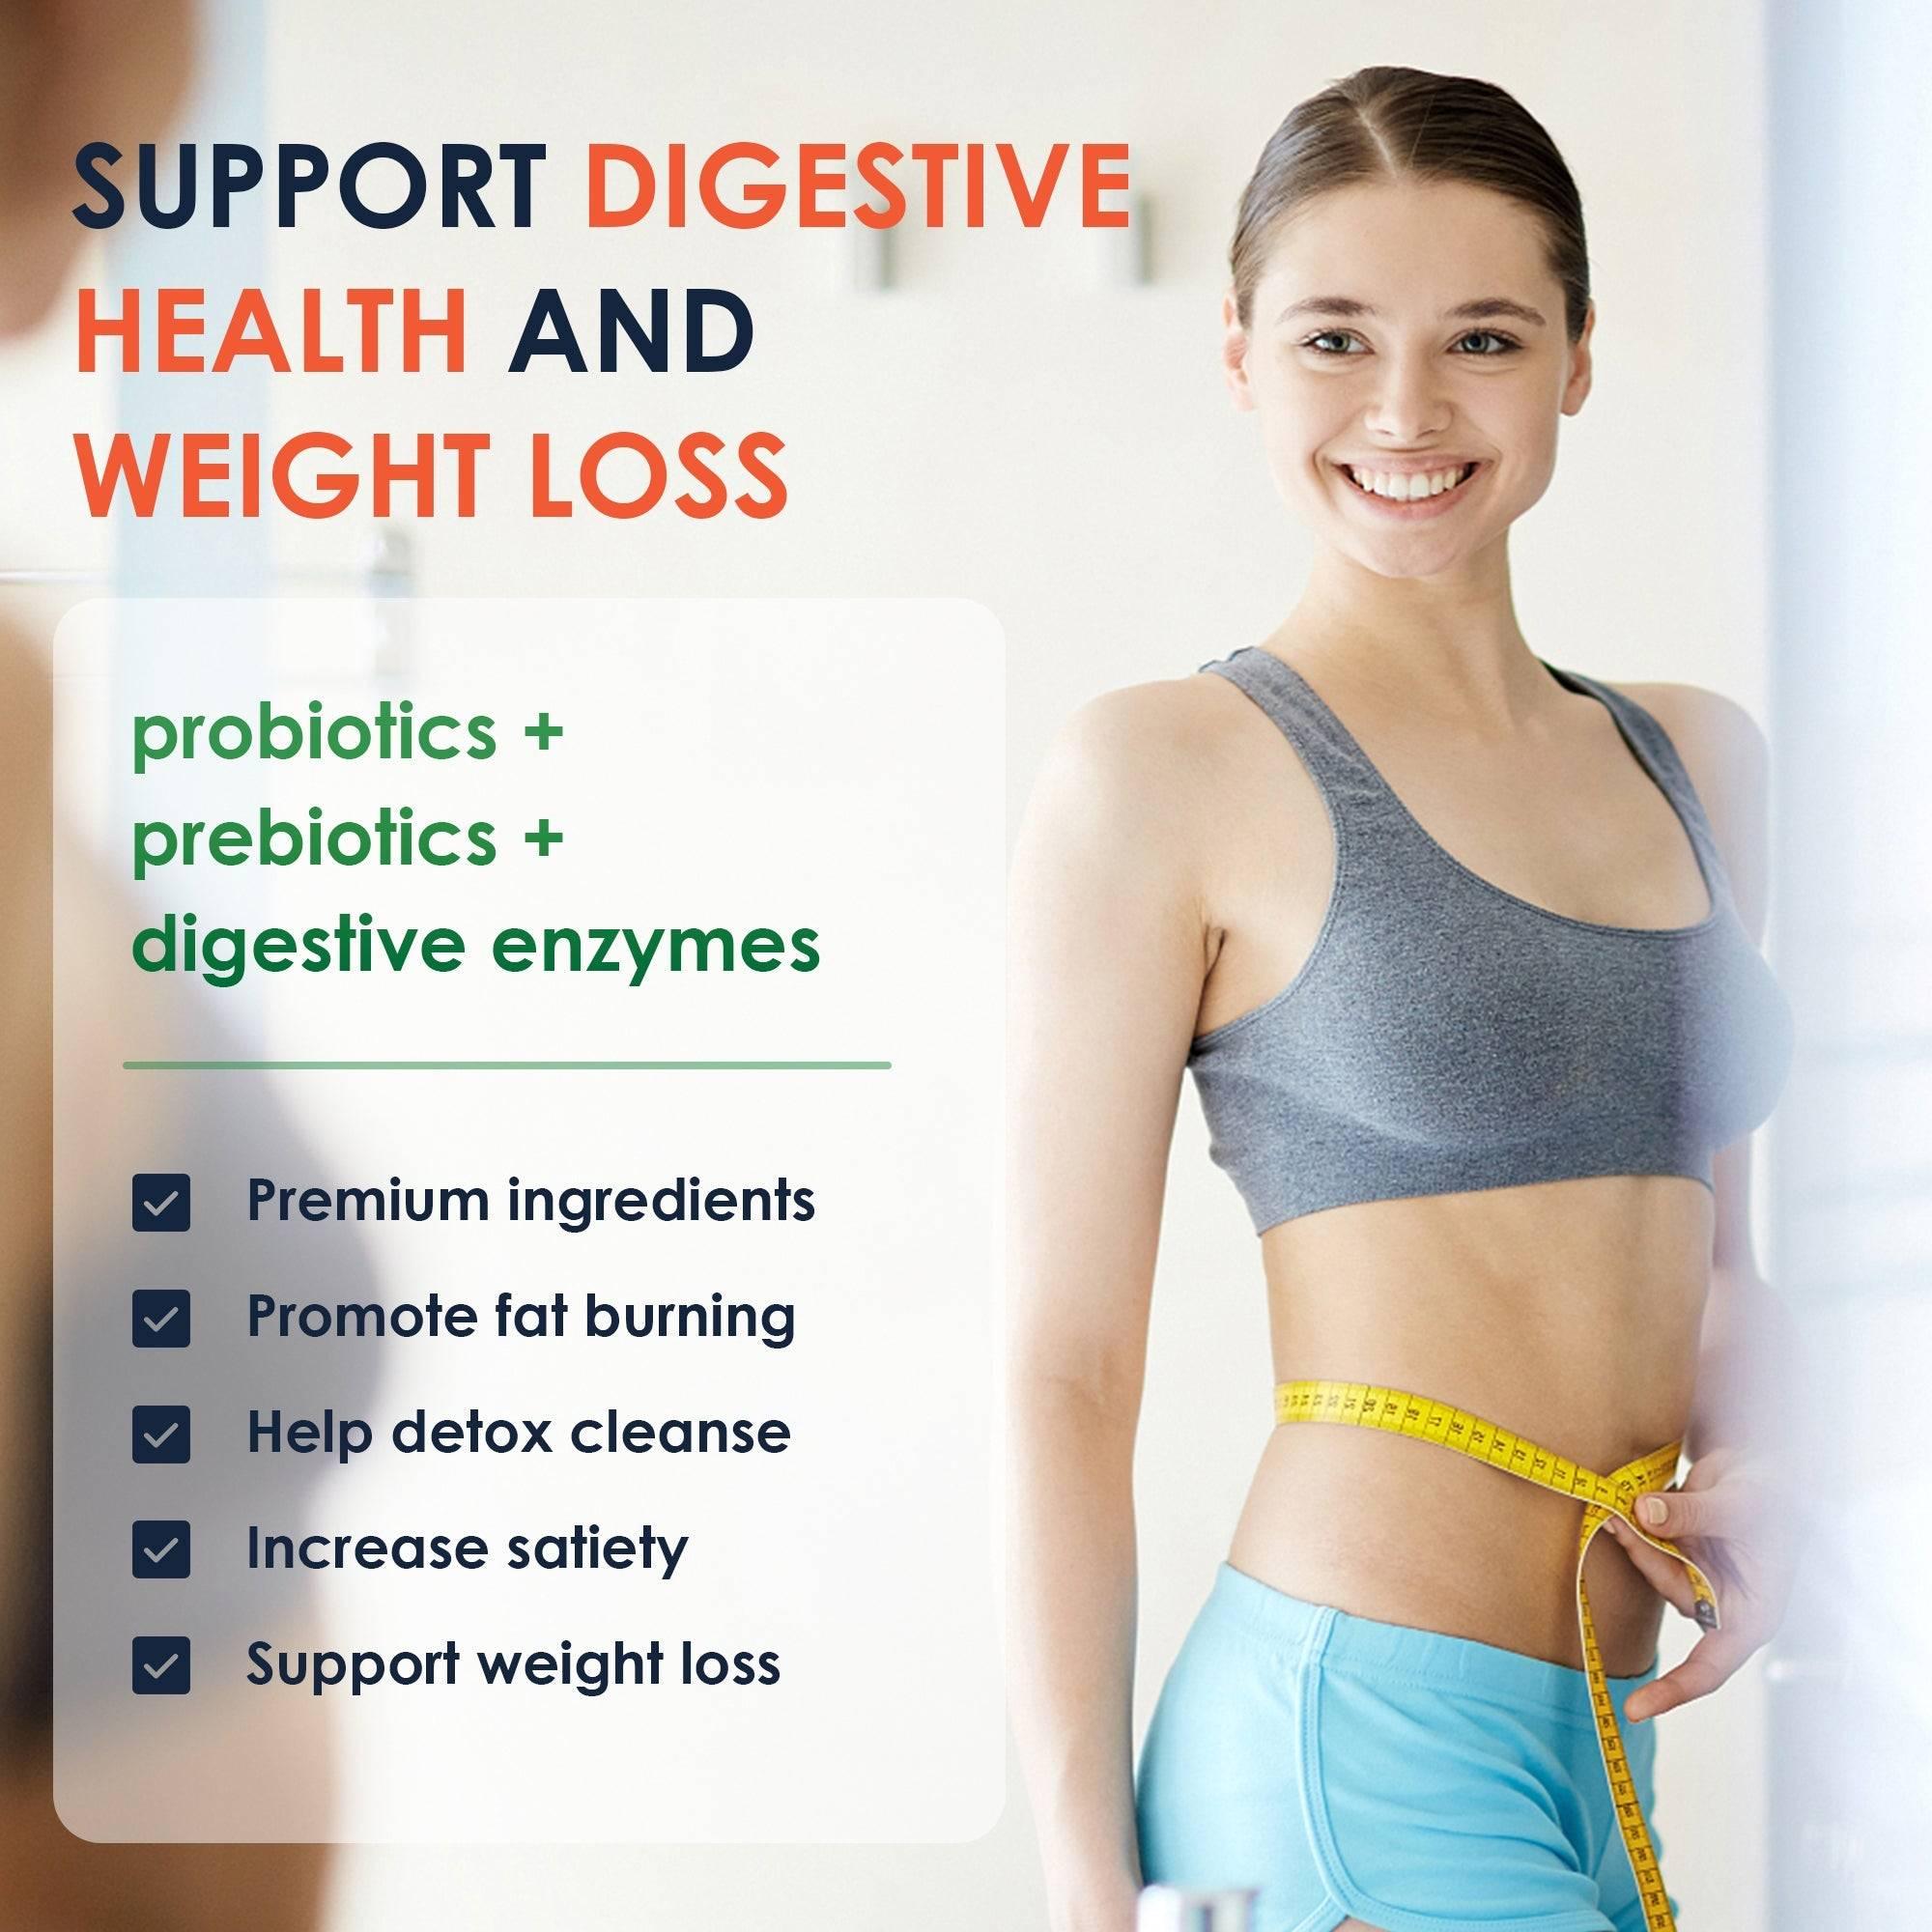 PROBIOTICS SUPPORT DIGESTIVE HEALTH AND WEIGHT LOSS